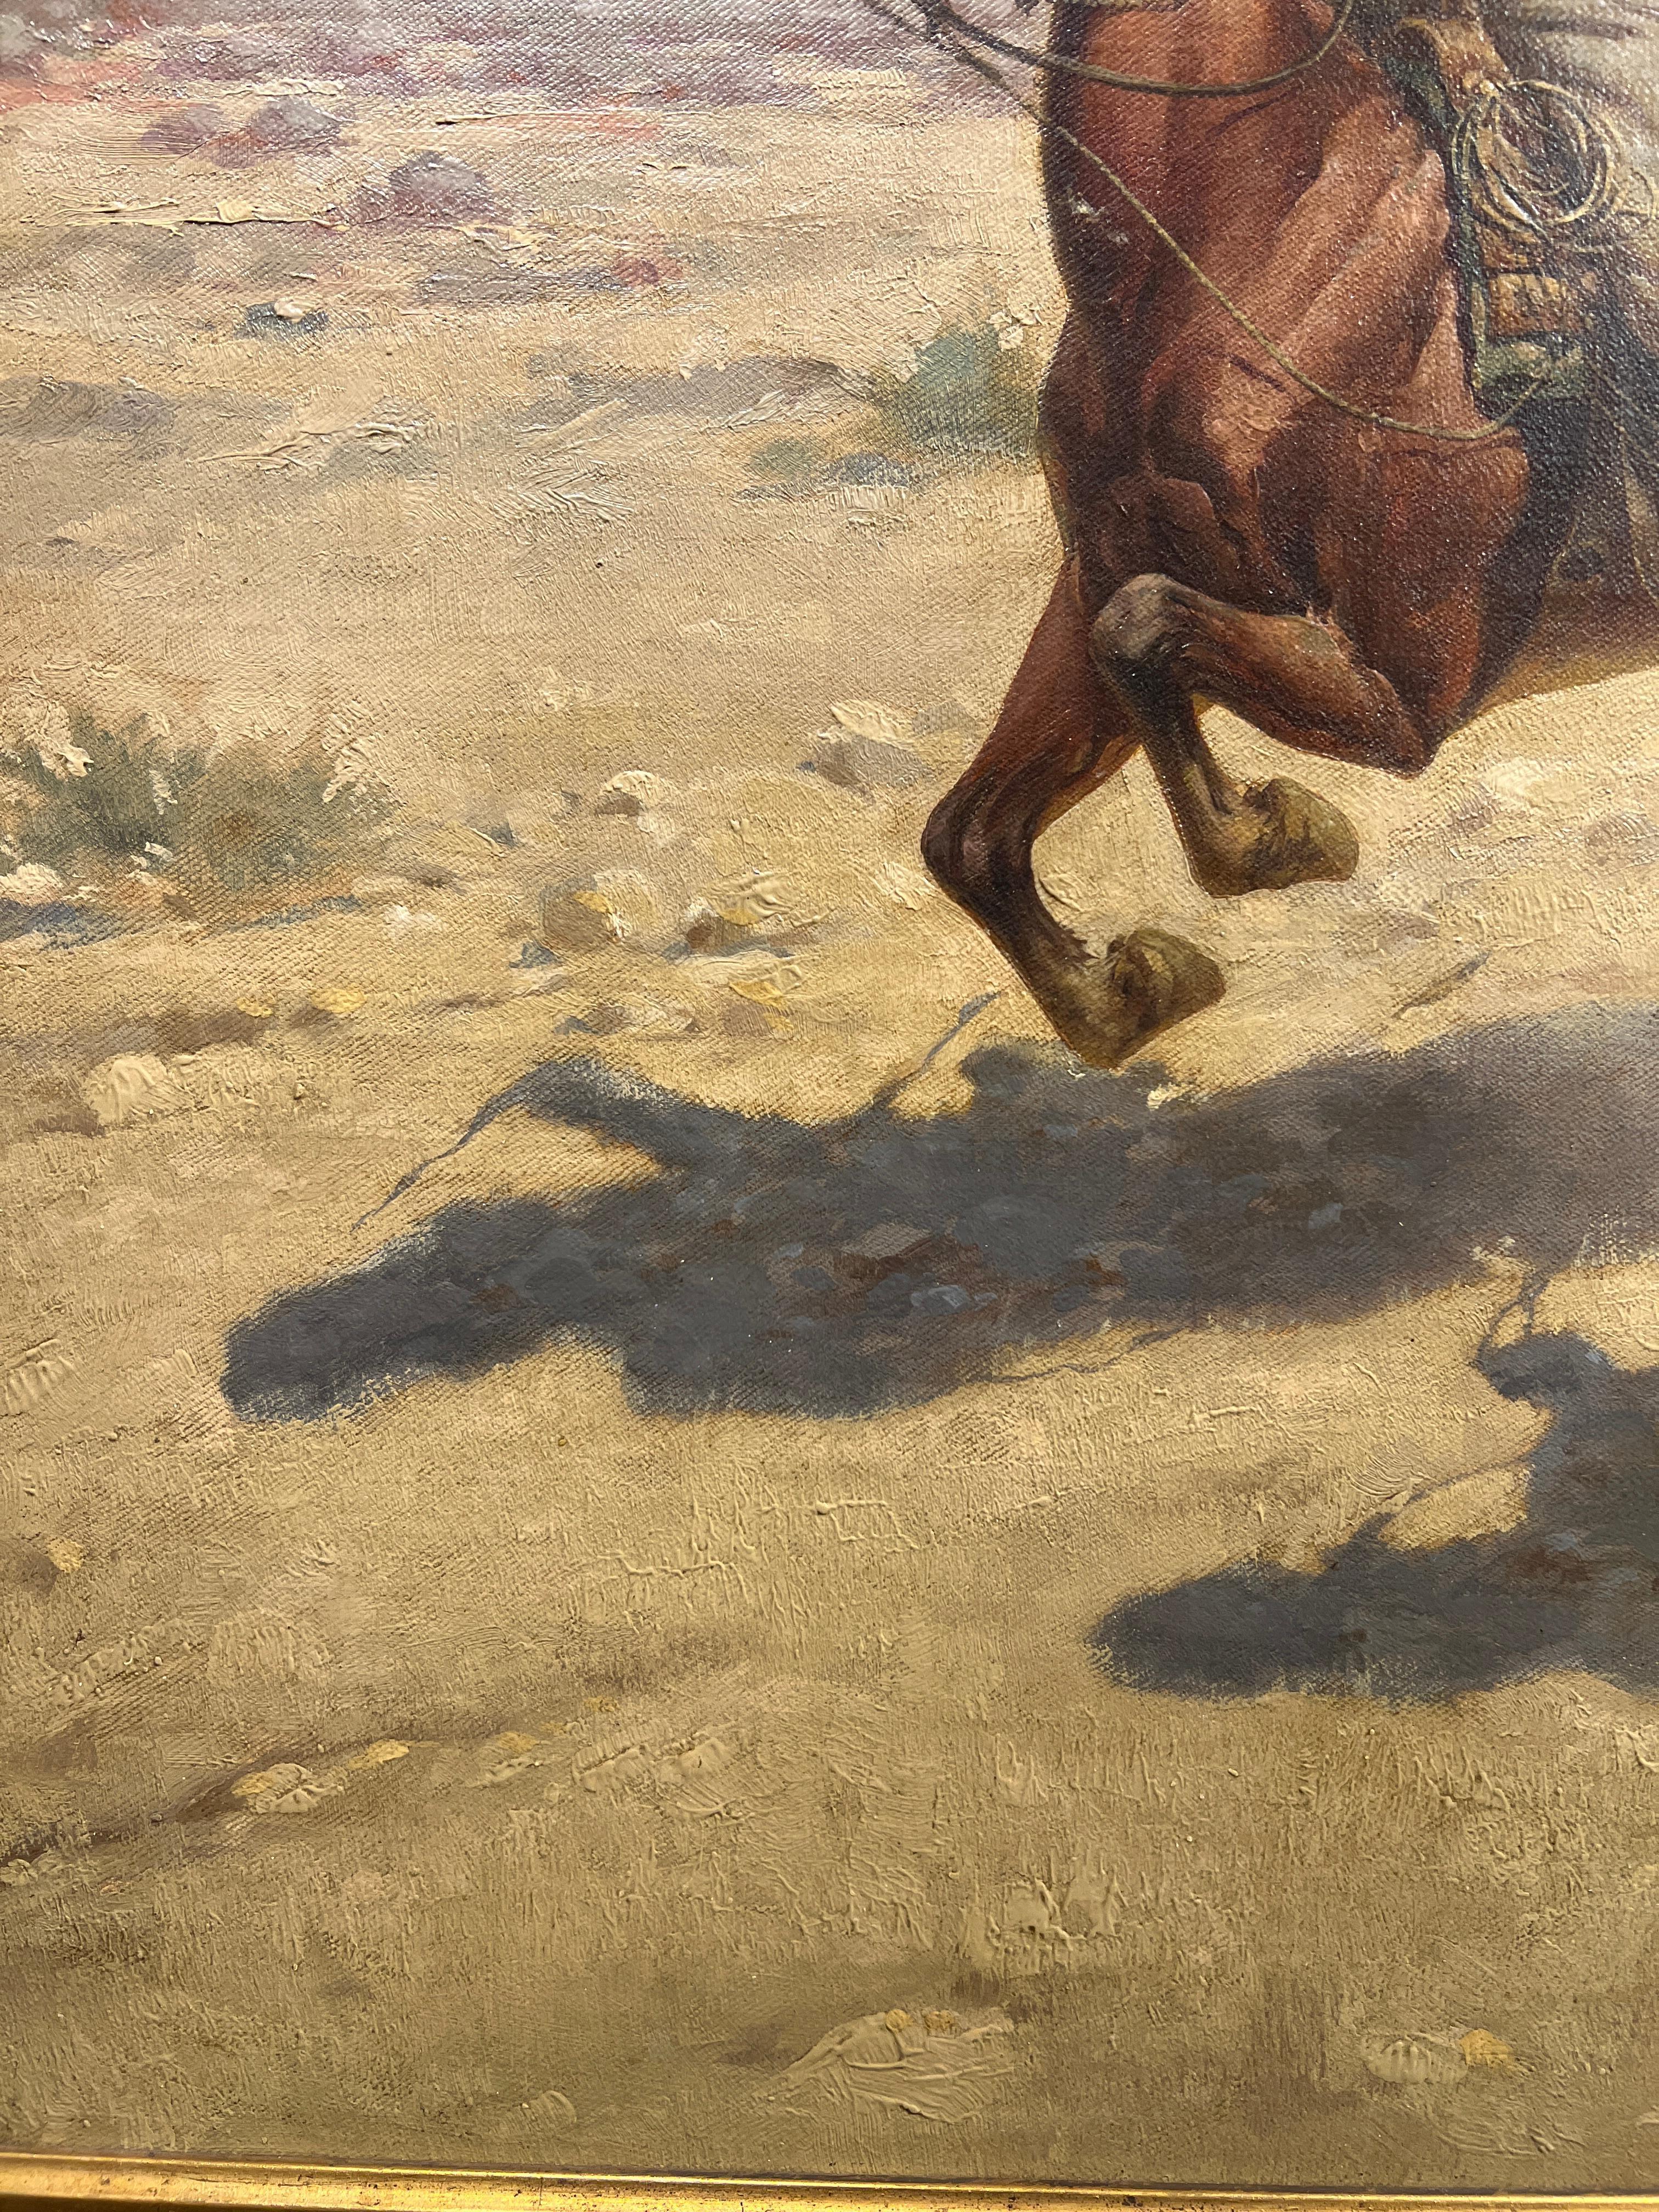 Herman Hanson (German, 1854-1924)
Cowboy Race, 1905
Signed and Dated Lower Right
24 x 36 inches
37 x 49 inches

Born in Dithmarschen, Germany, Herman Hansen created meticulous watercolors expressive of by-gone days of the Old West, its horses,